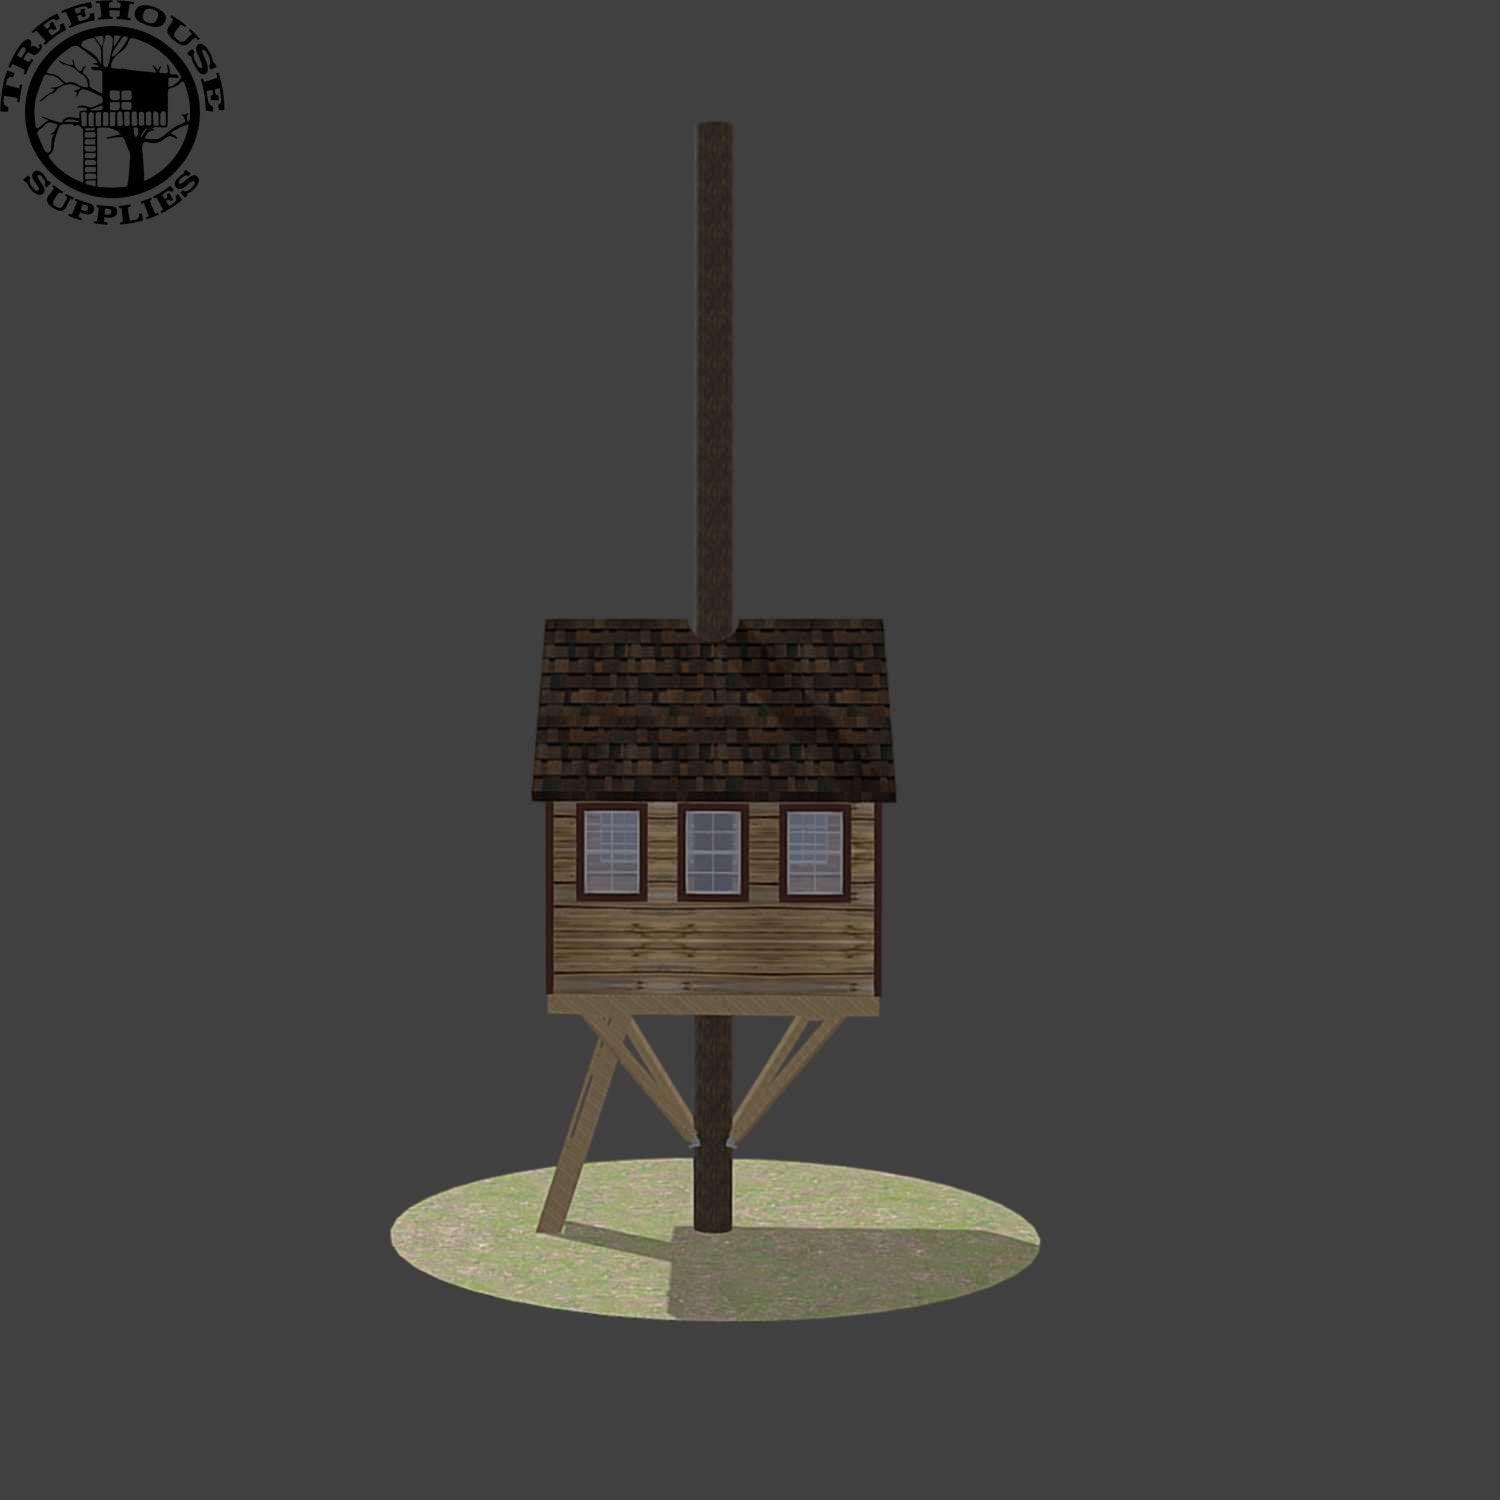 THE BITTERROOT © : 10' Square Treehouse Plan